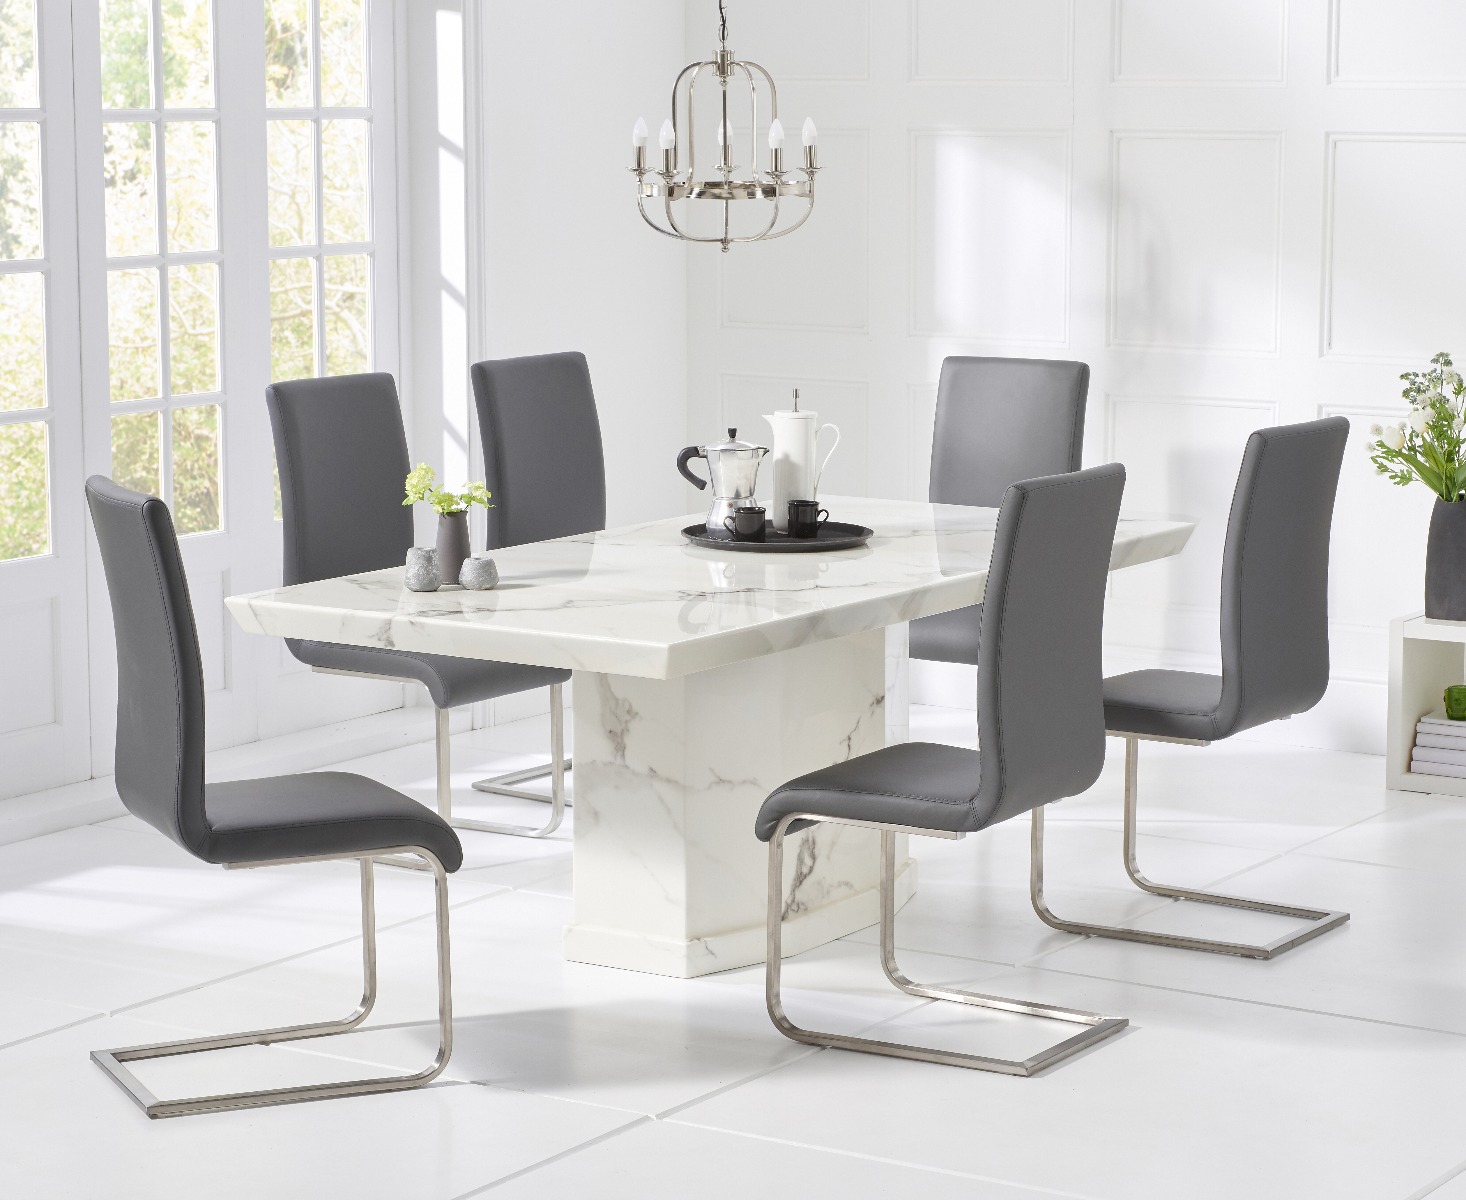 Carvelle 200cm White Pedestal Marble Dining Table With 12 Grey Malaga Chairs